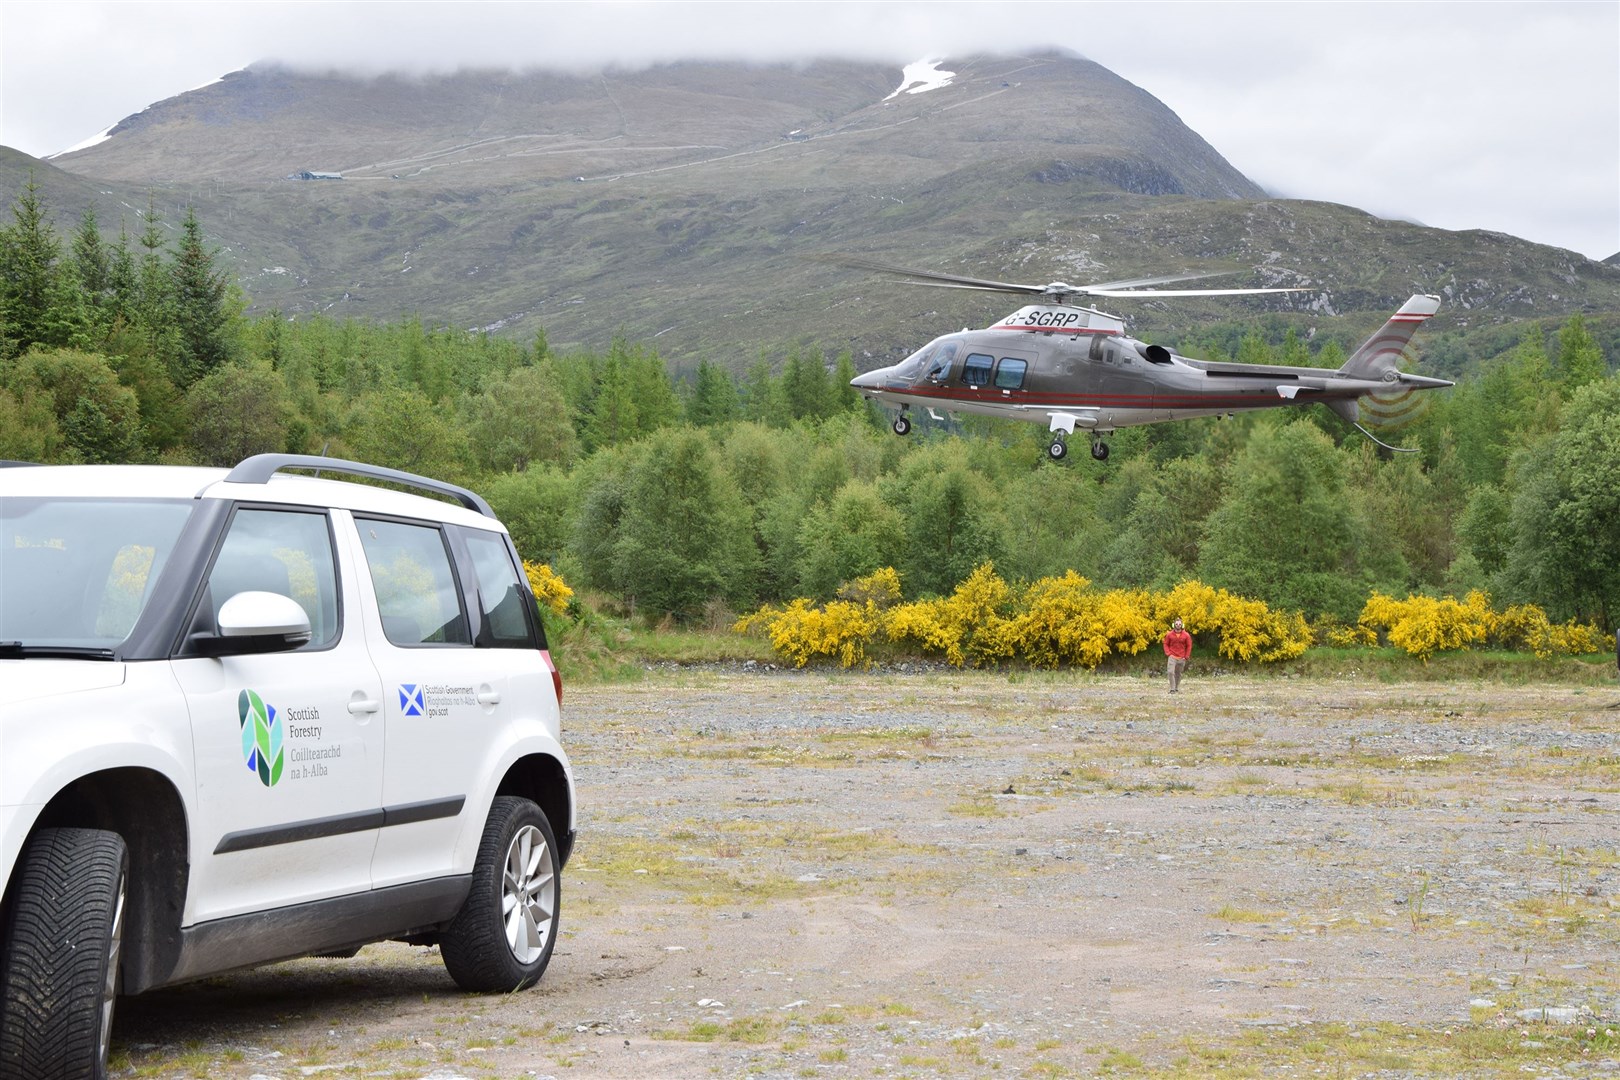 A vehicle and helicopter prepare for survey work.